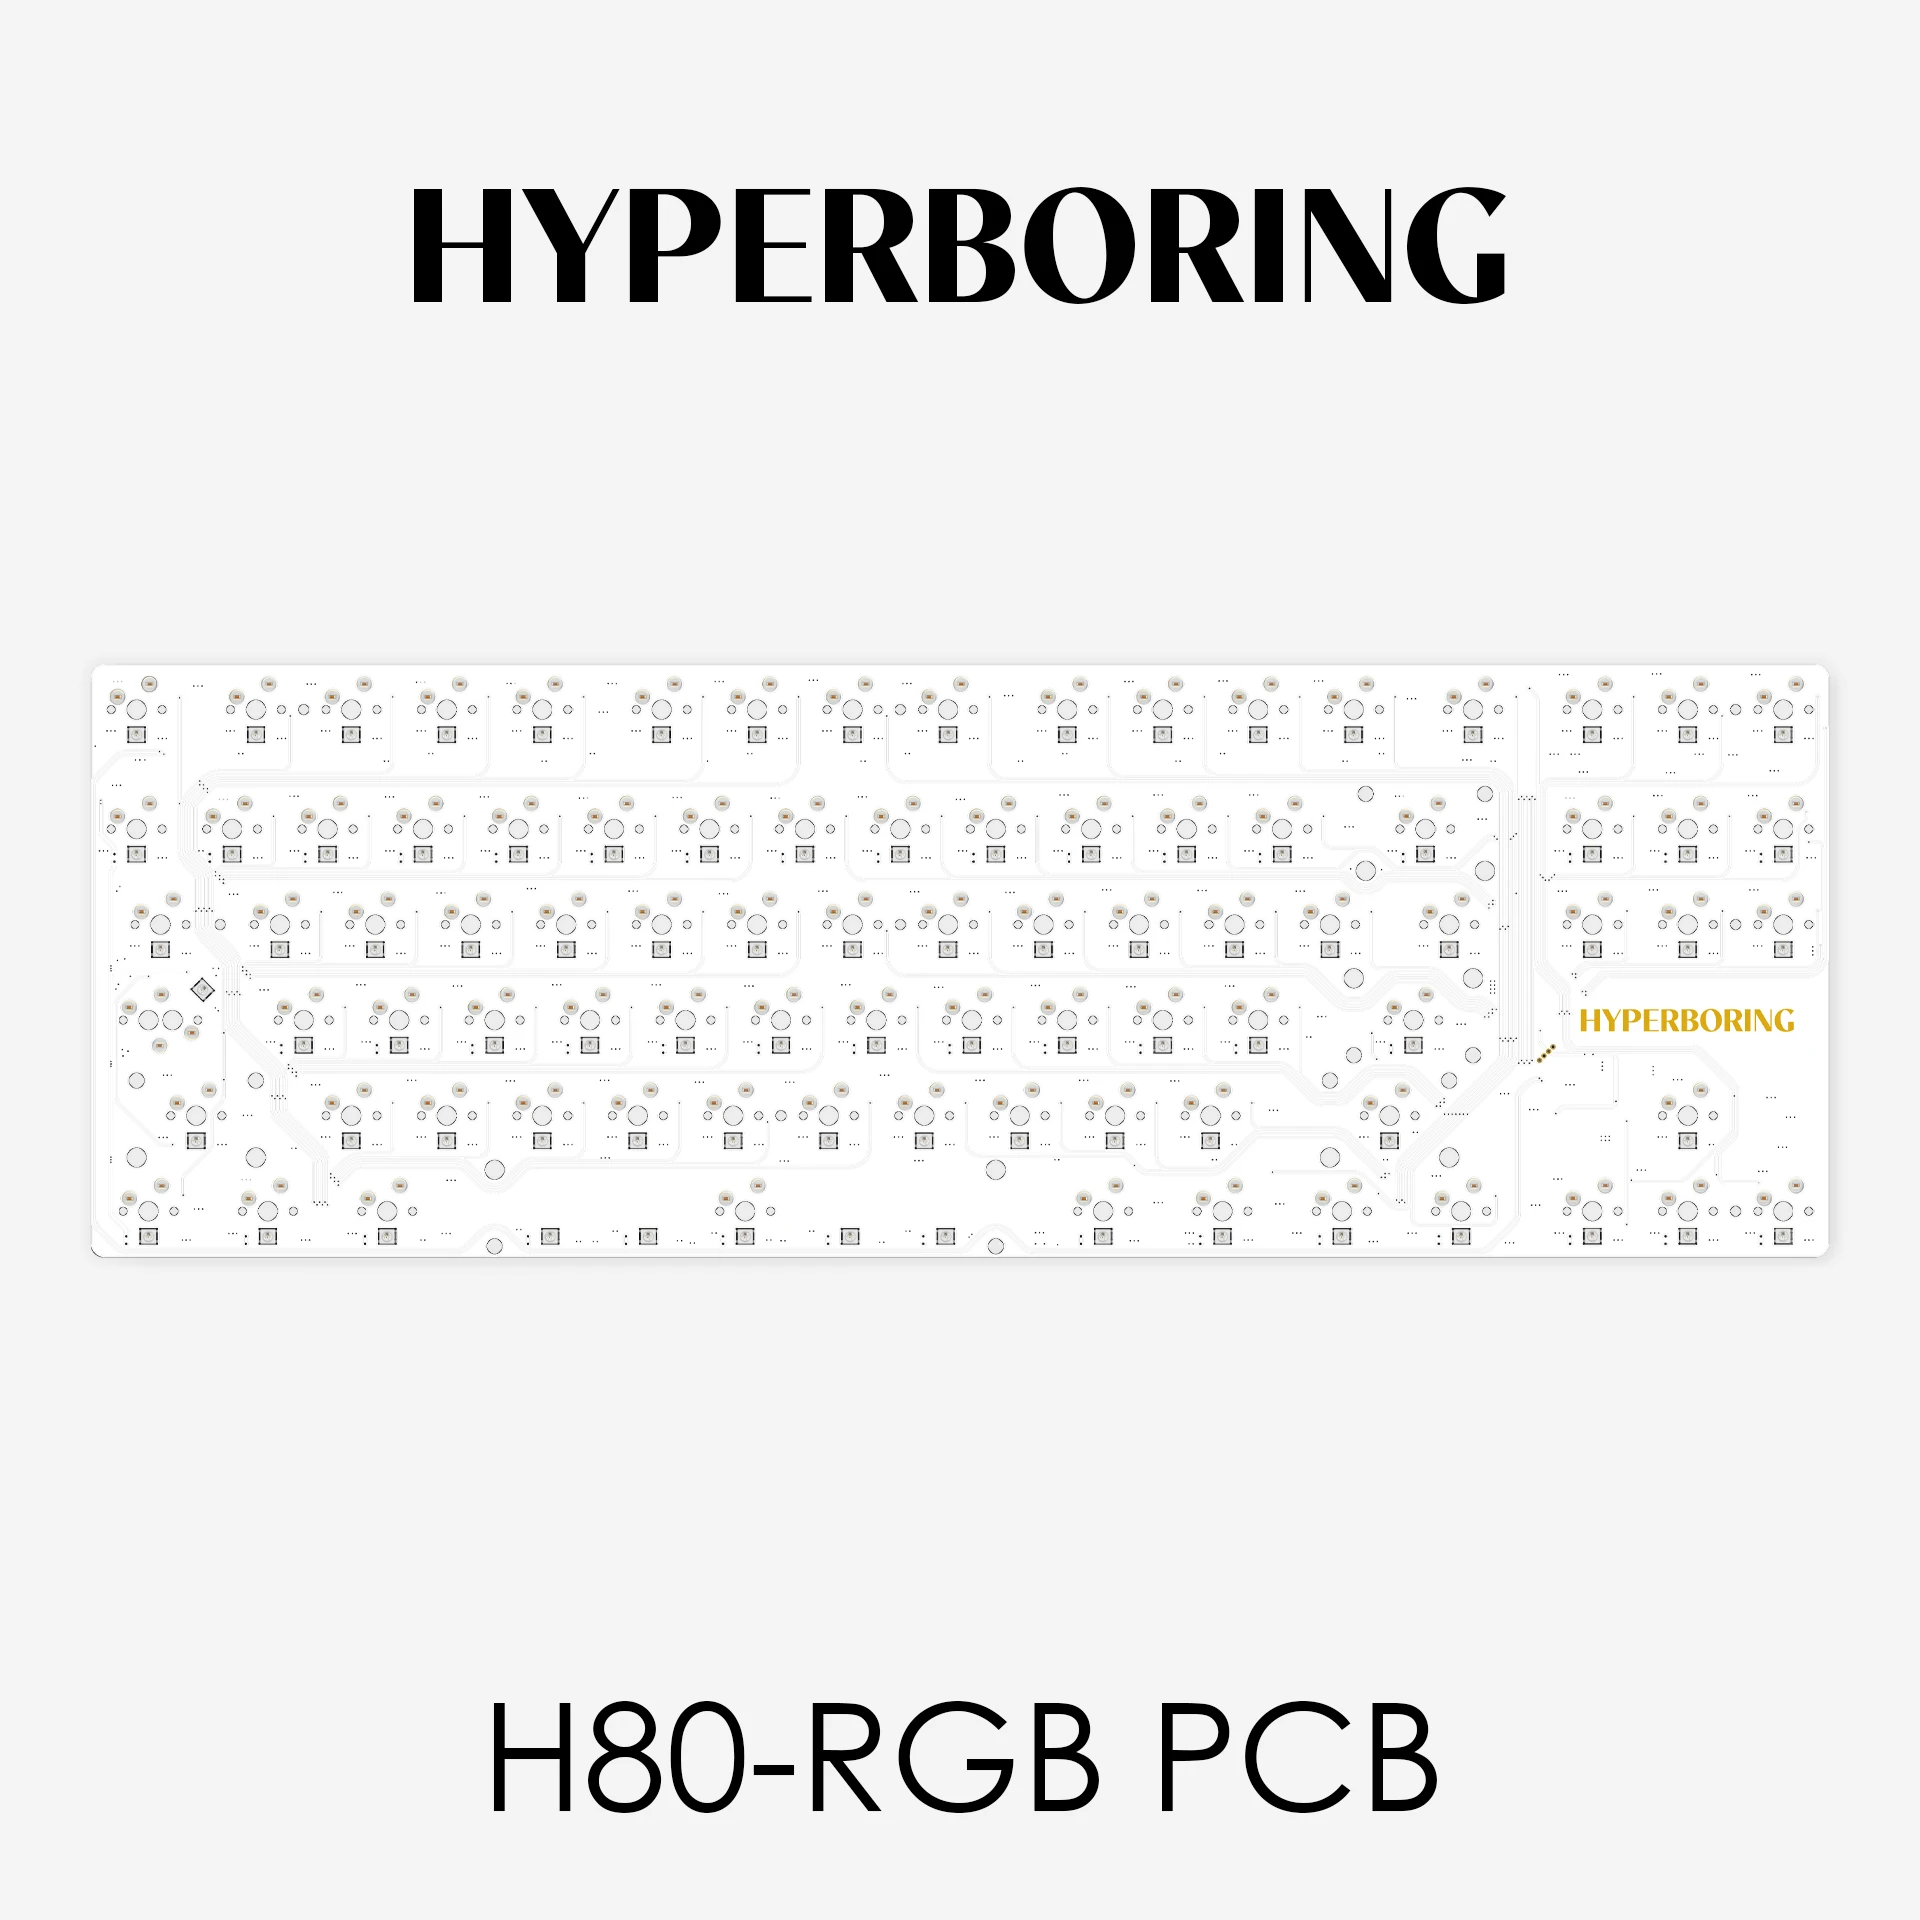 

H80-RGB keyboard Wired Hotswap PCB compatible with Mr. Suit and Tiger lite 80 case